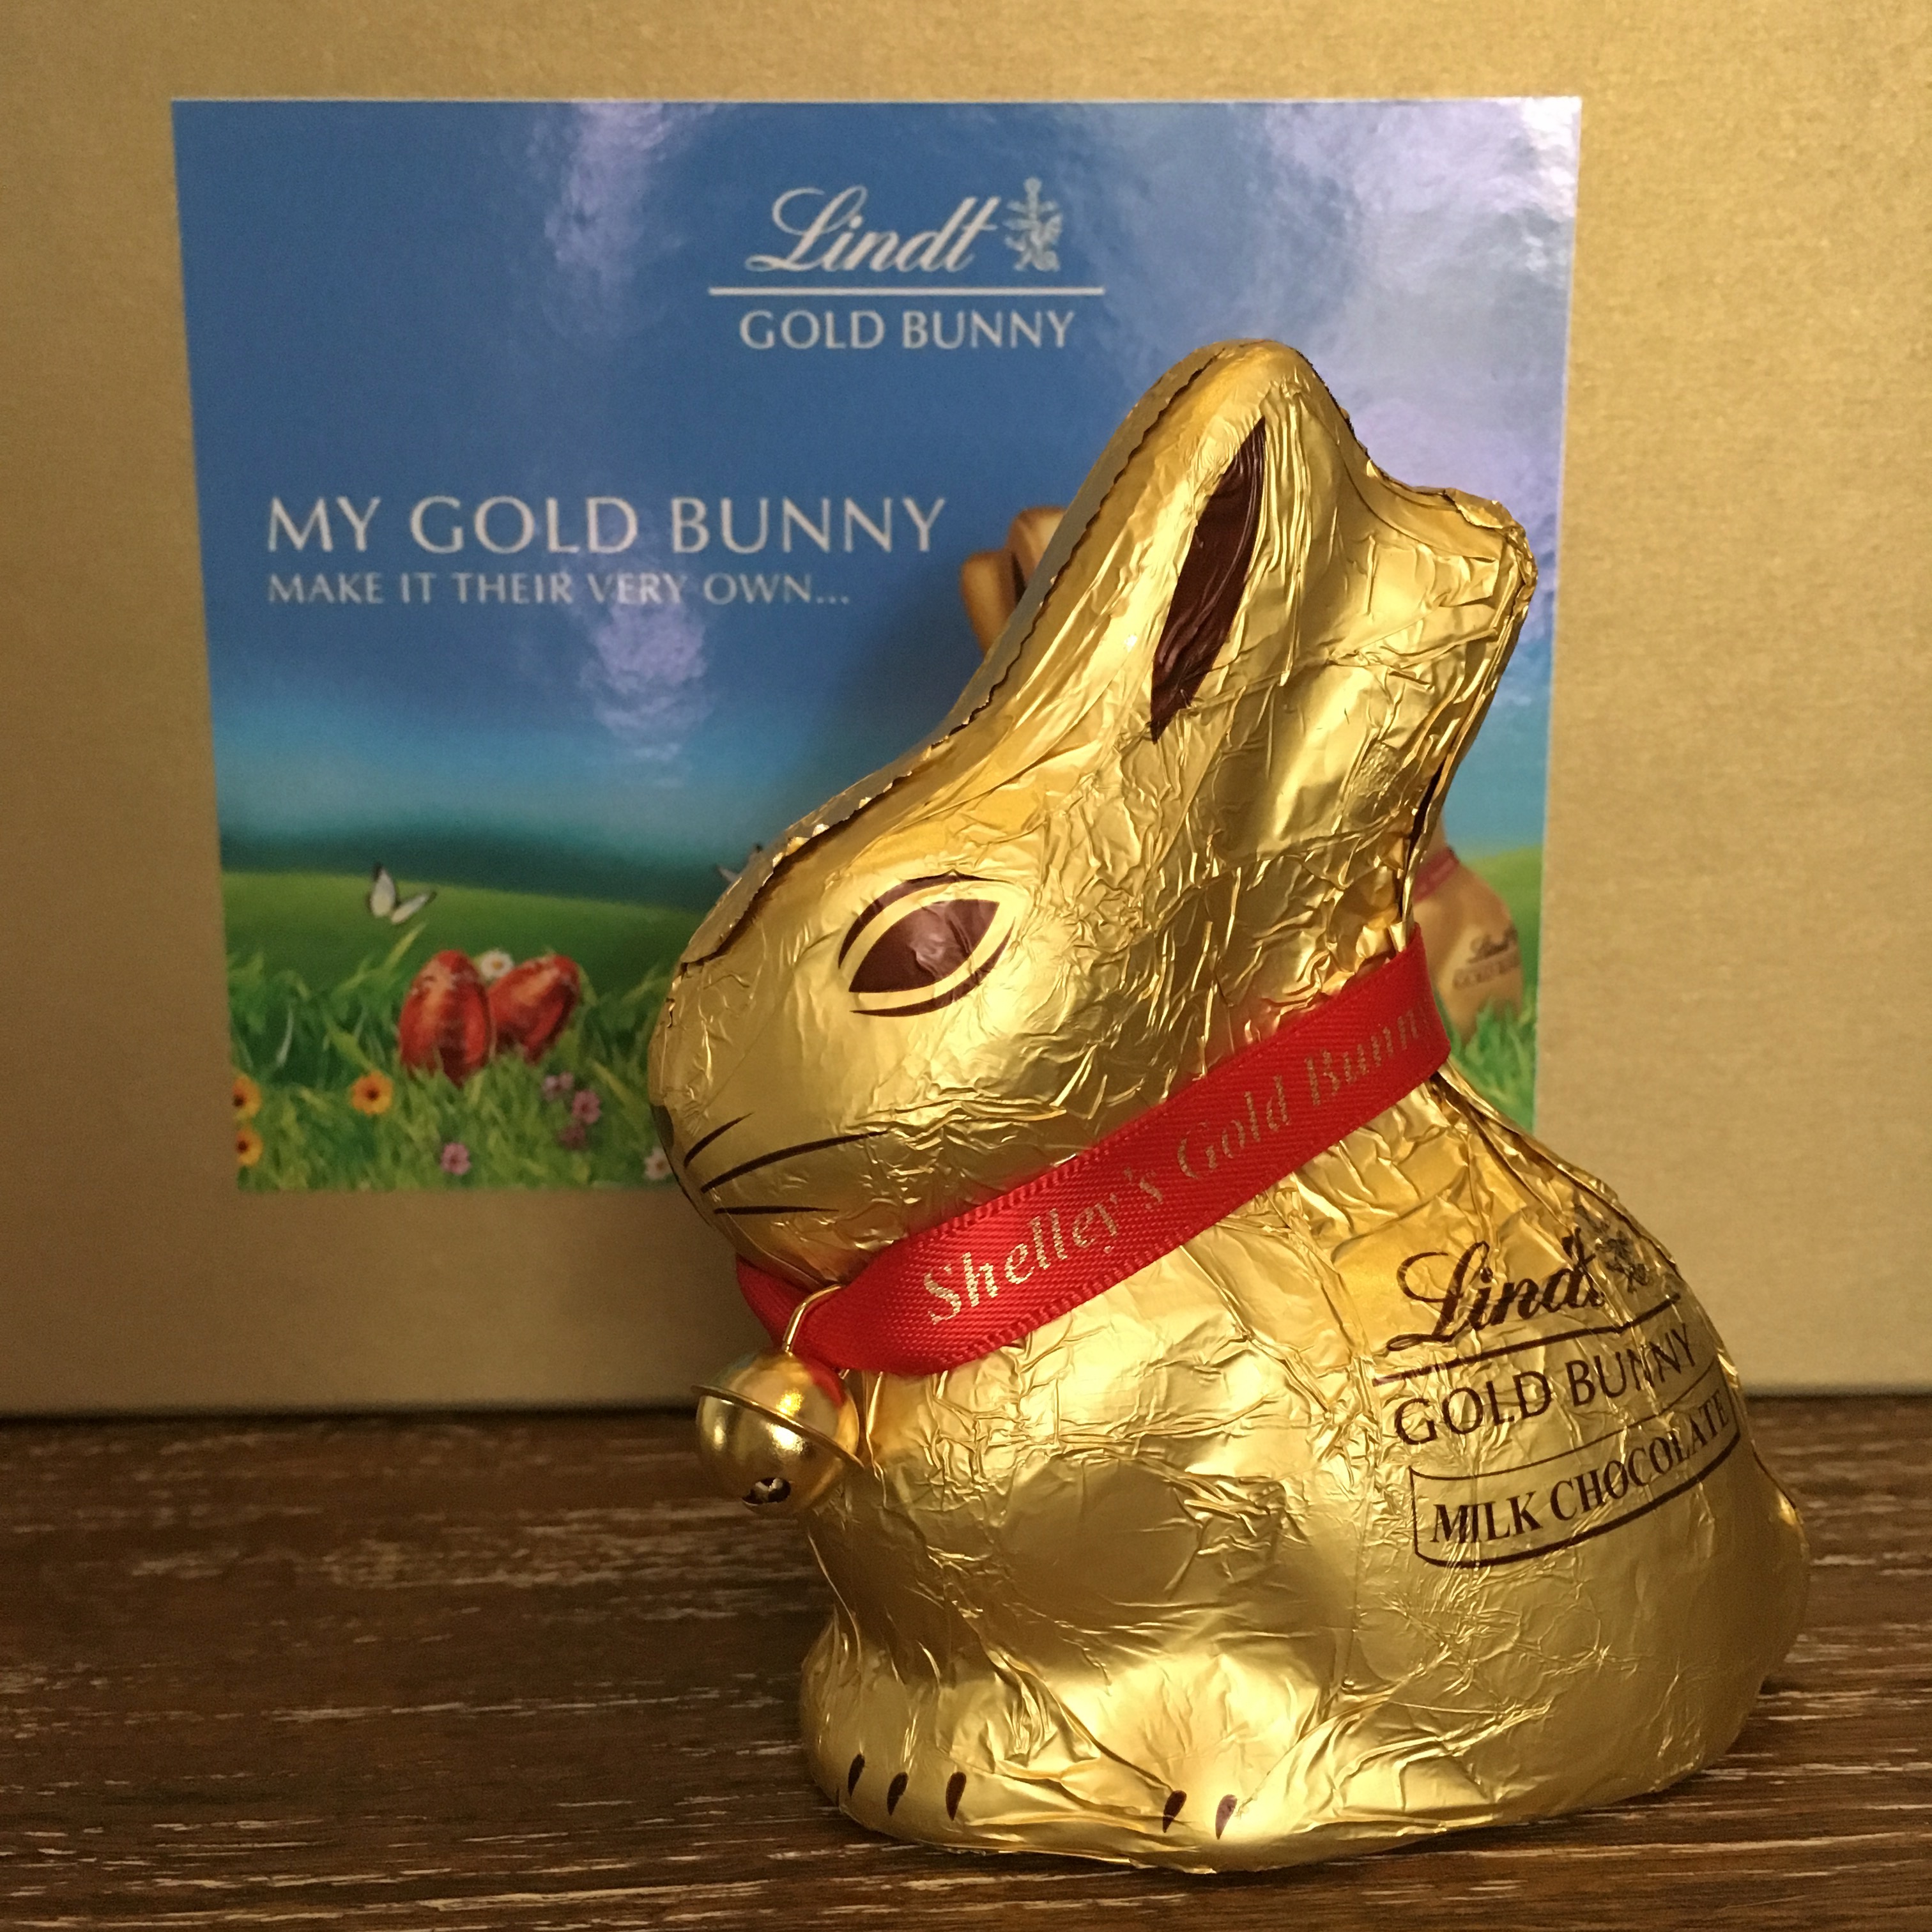 My personalized LINDT GOLD BUNNY